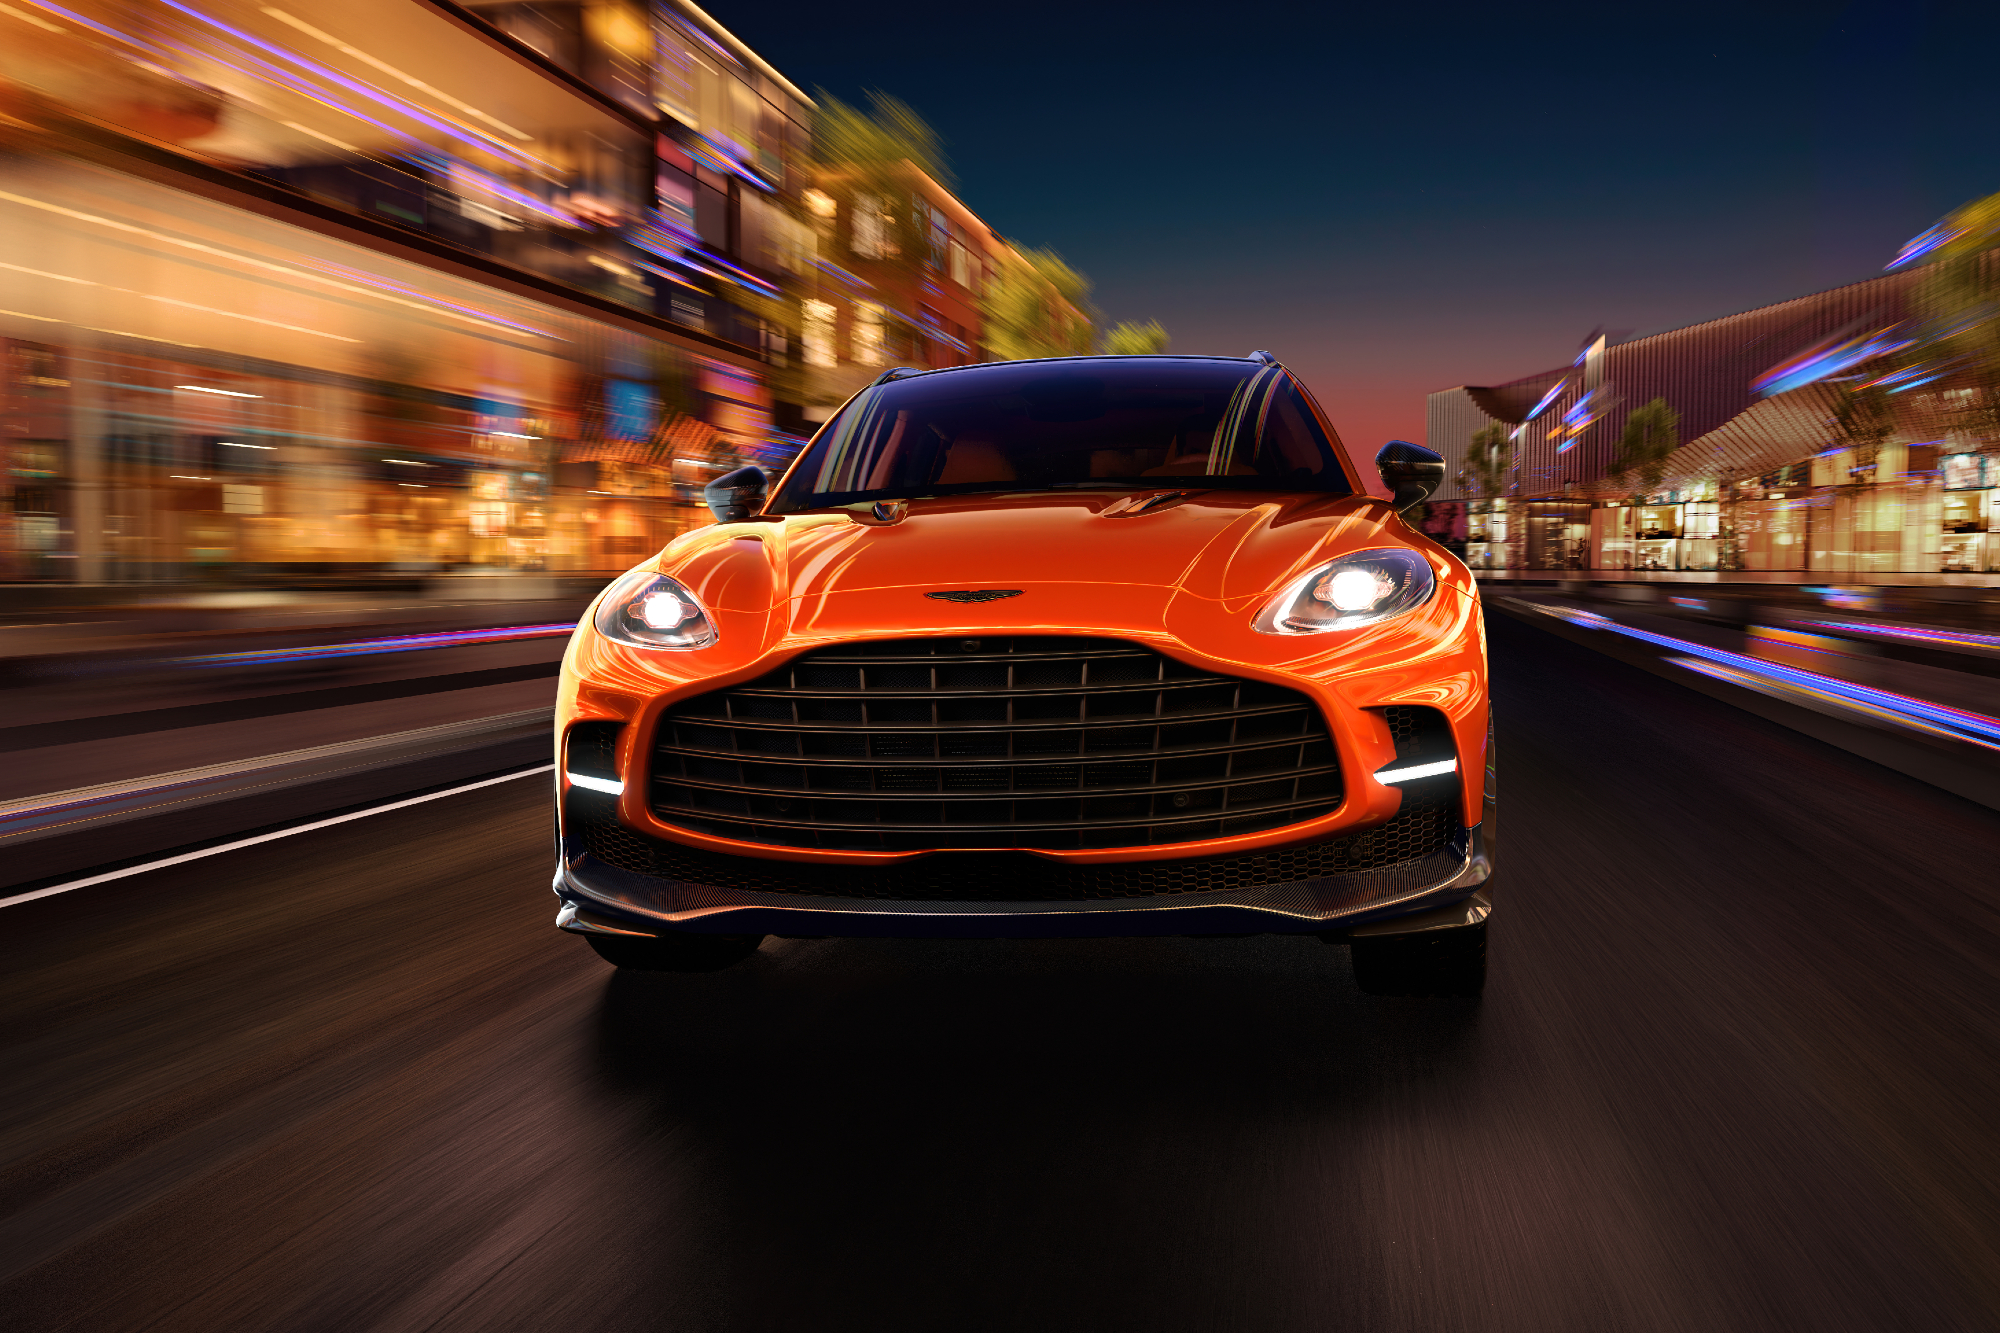 Aston Martin DBX707 on a city street with blurred lighting as car drives directly toward the camera.